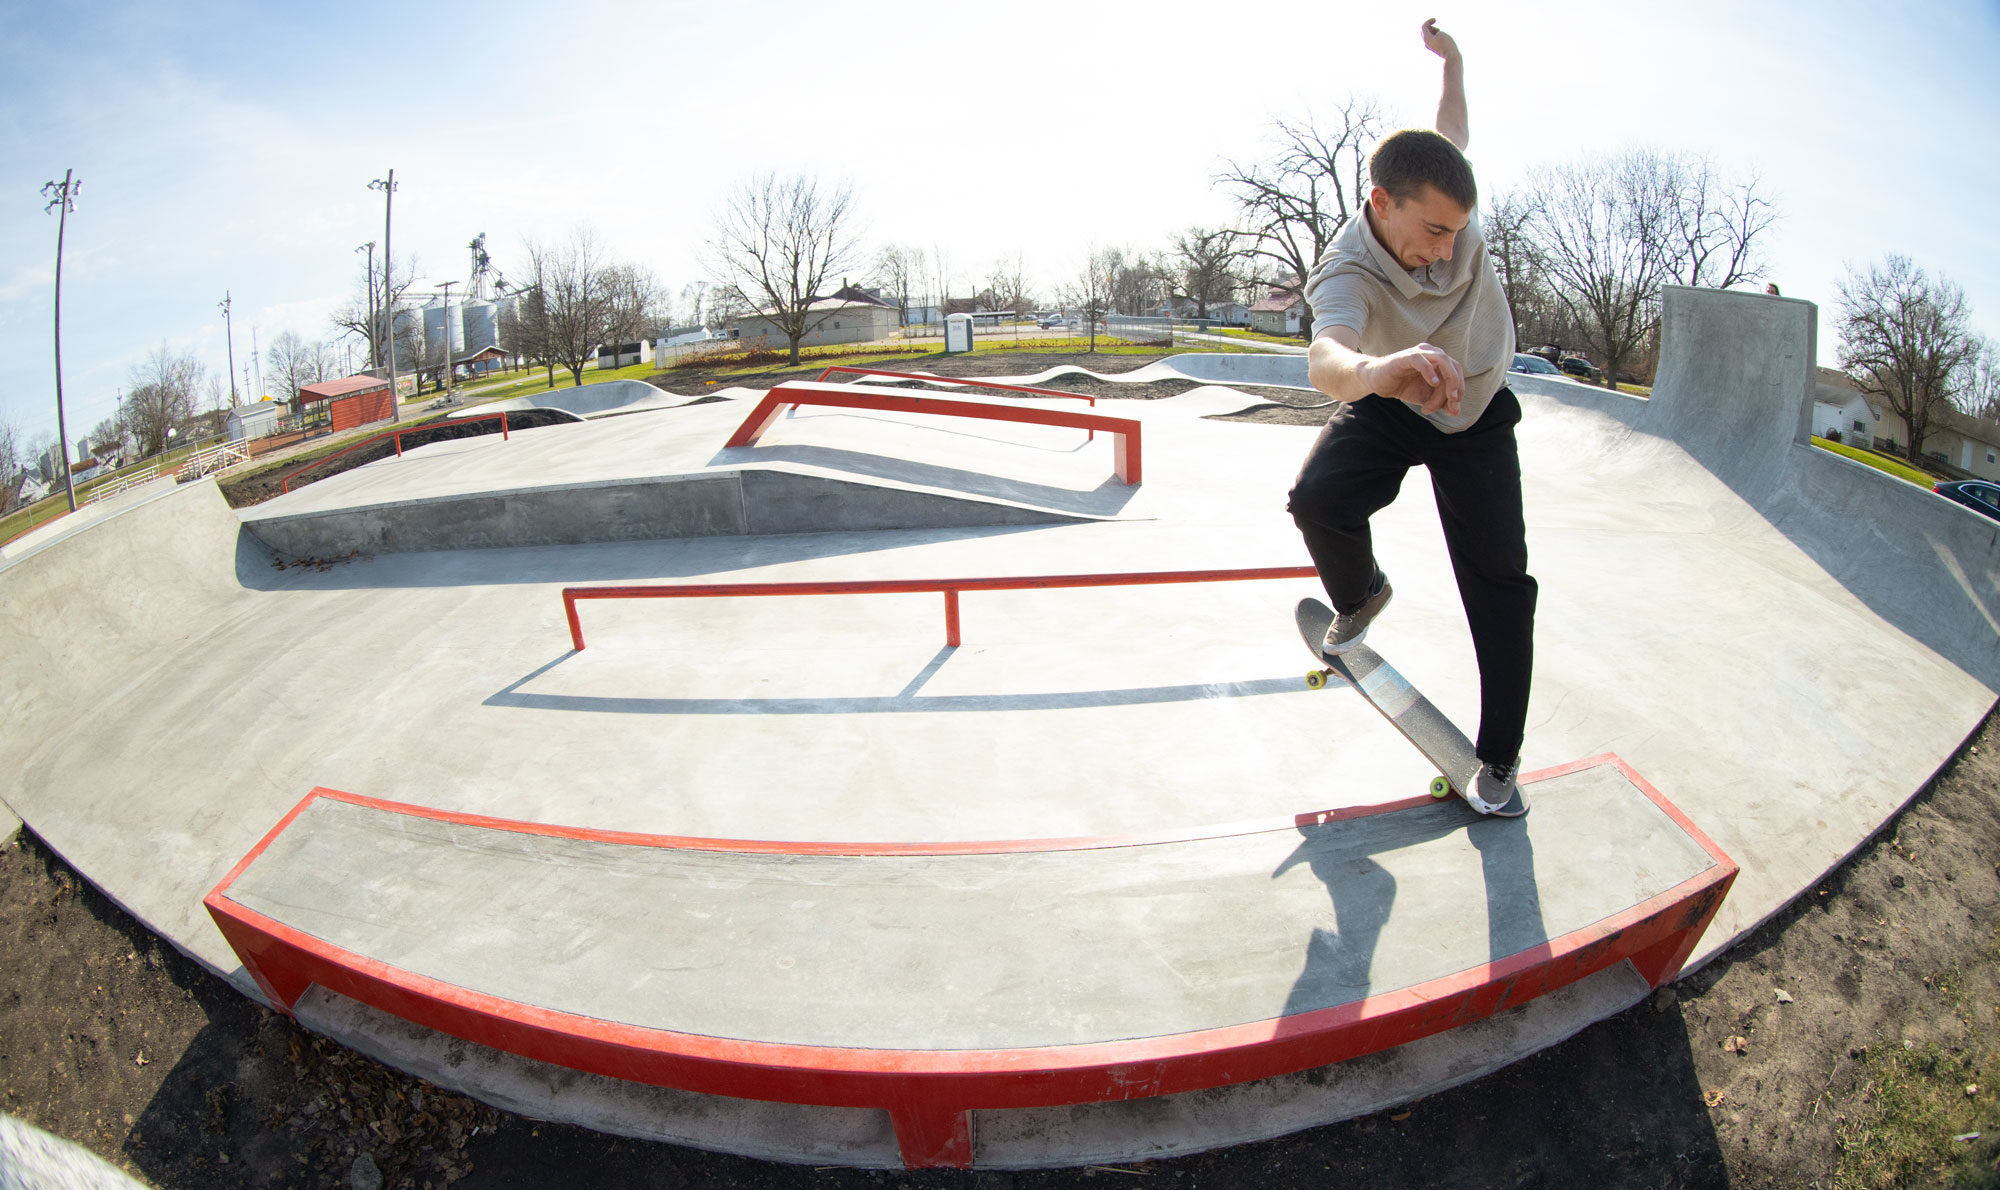 Frontside Crookedgrind at the Ed Day Memorial Skatepark in Gibson City, IL